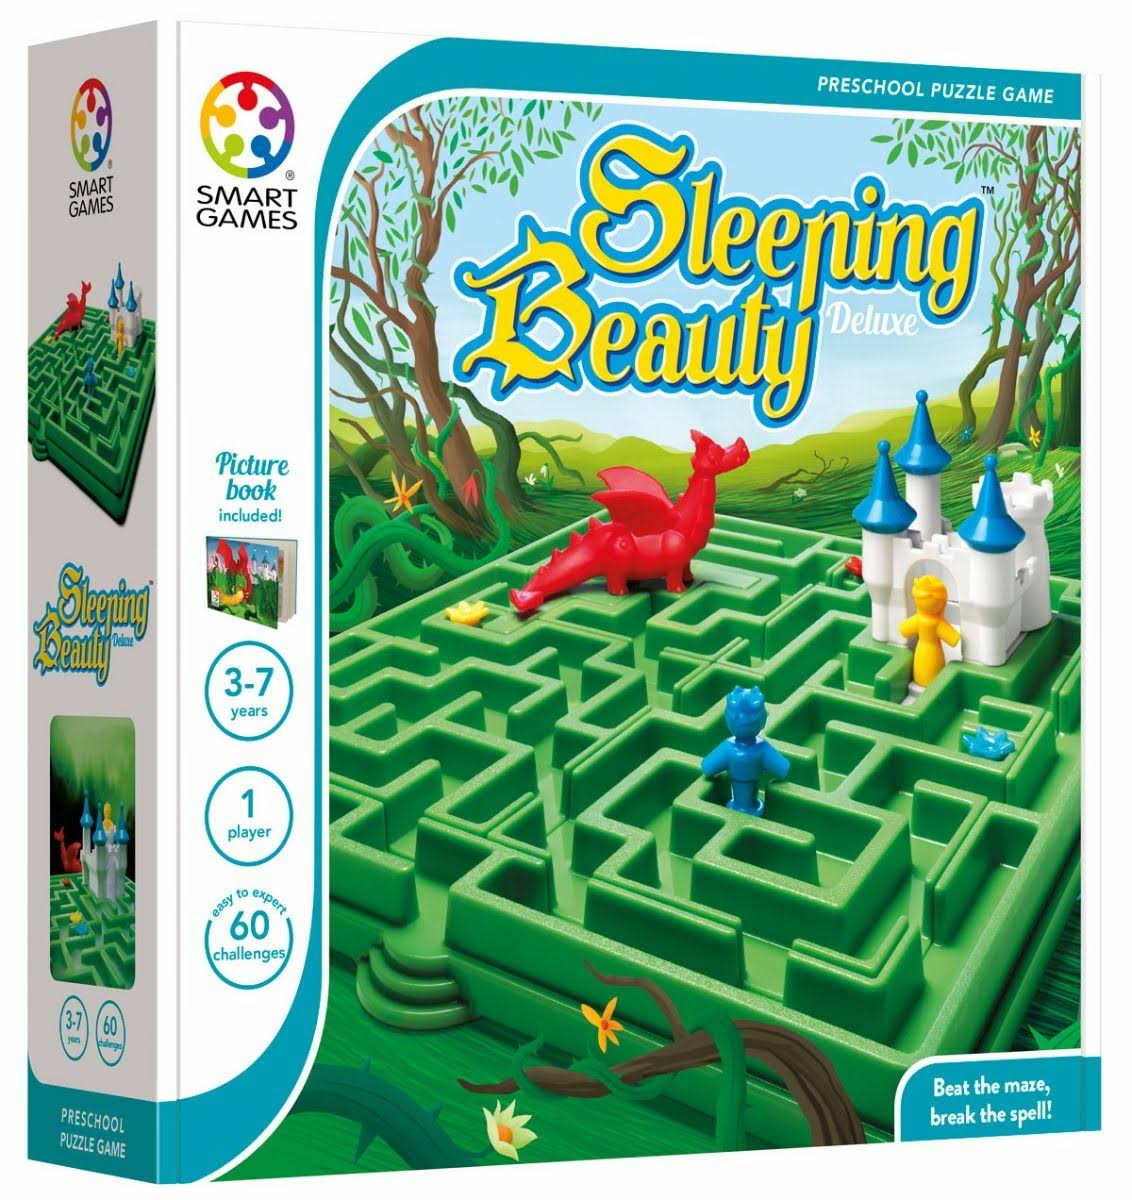 SmartGames Sleeping Beauty Board Game, A Preschool Puzzle Game and